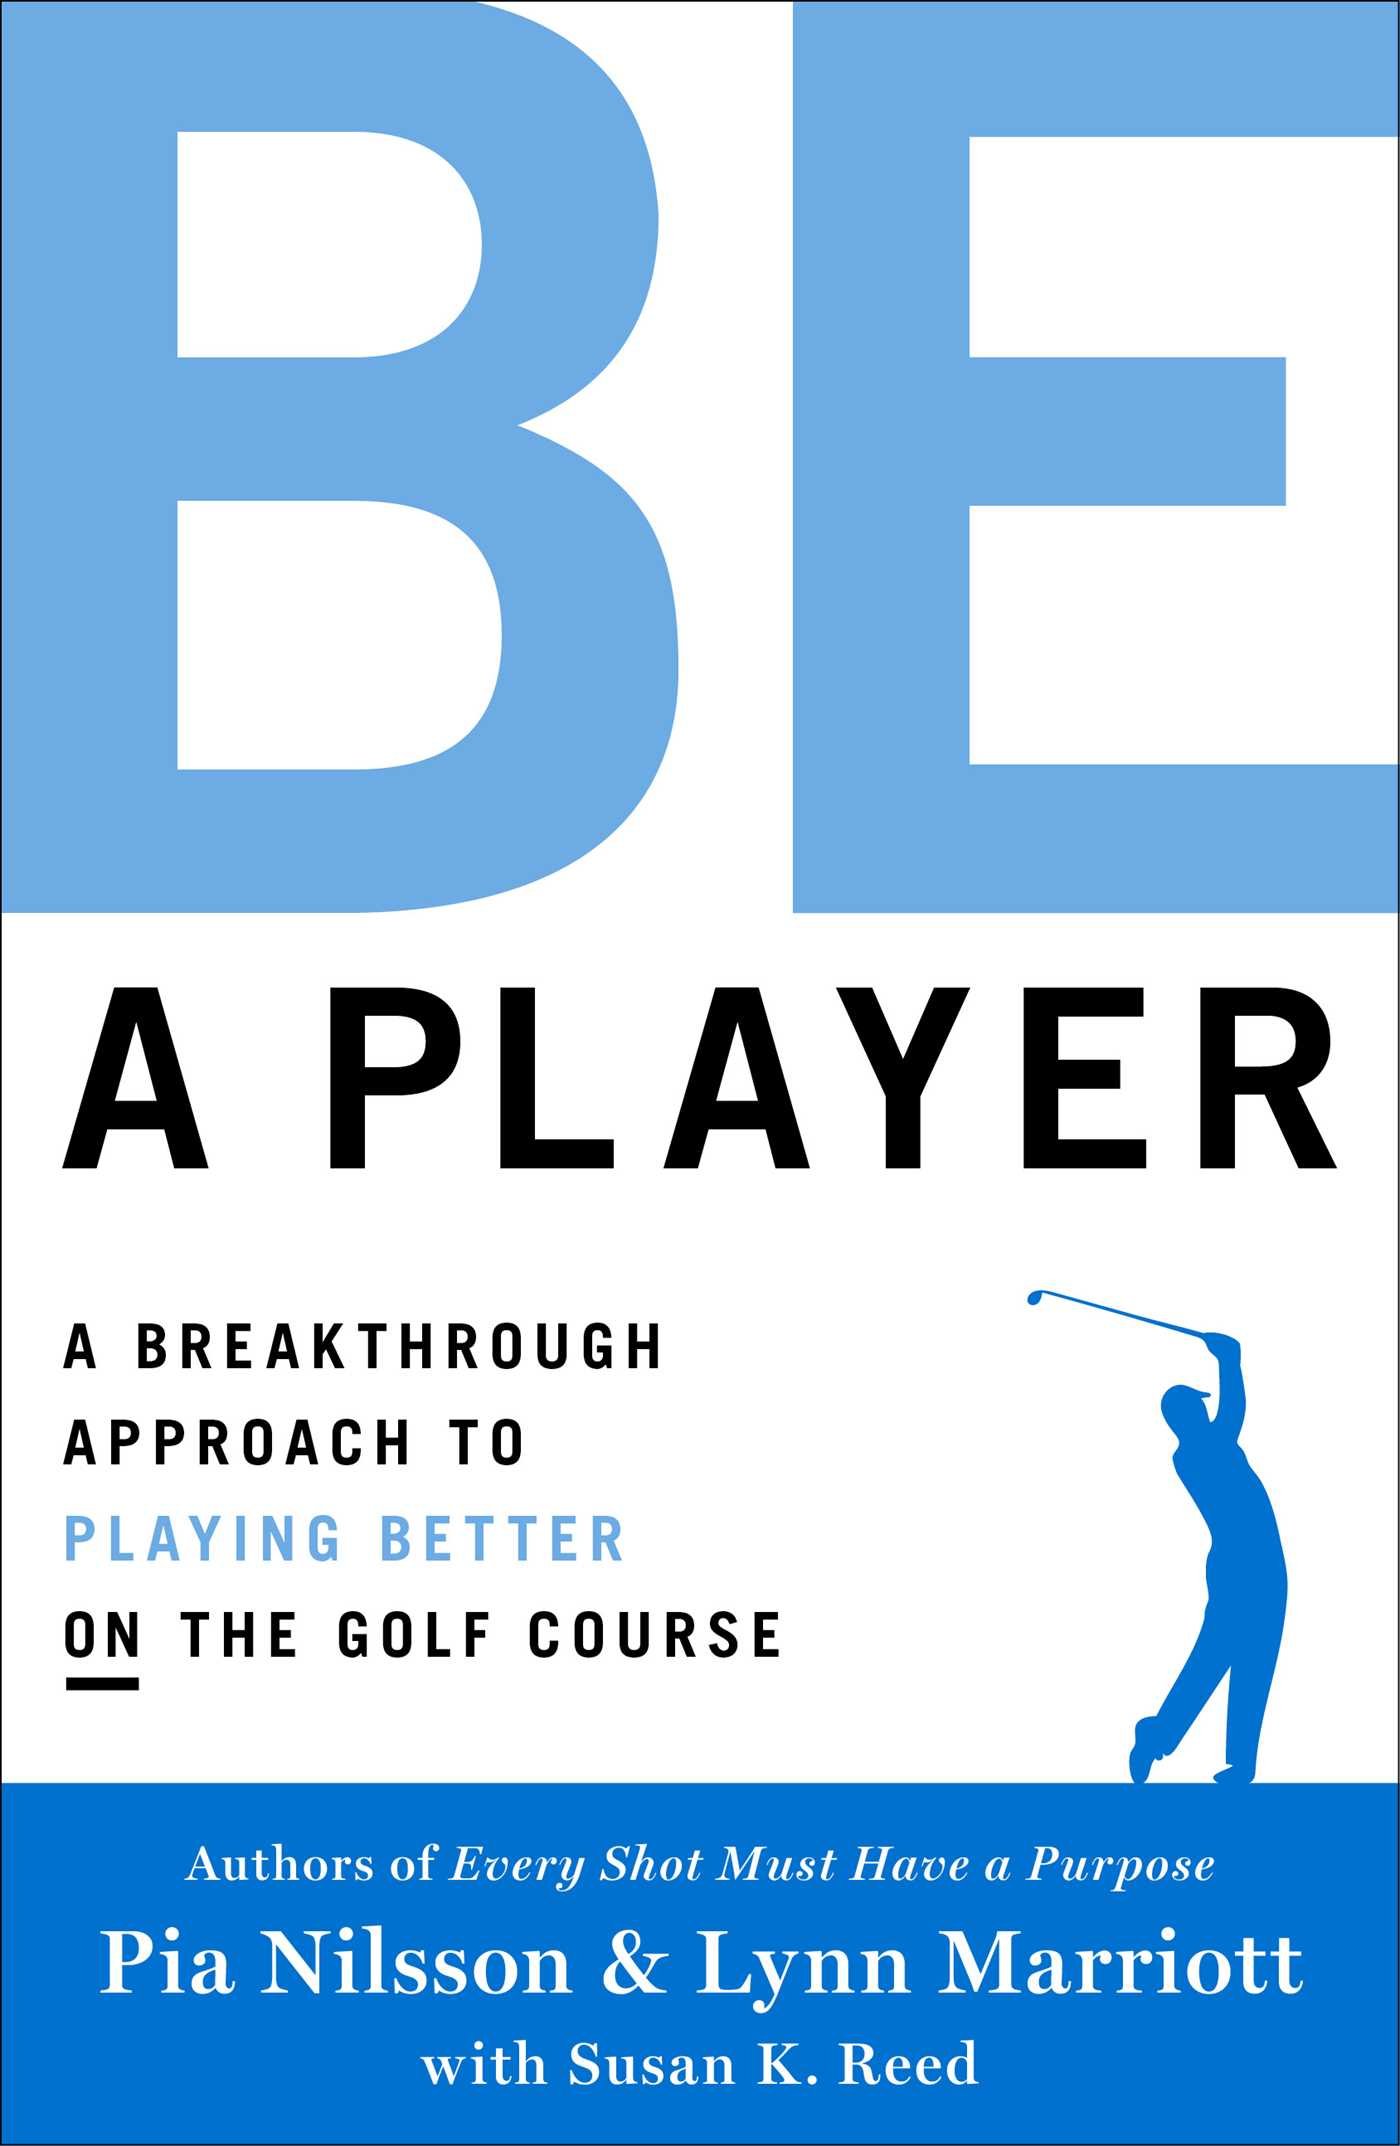 Image for "Be a Player"